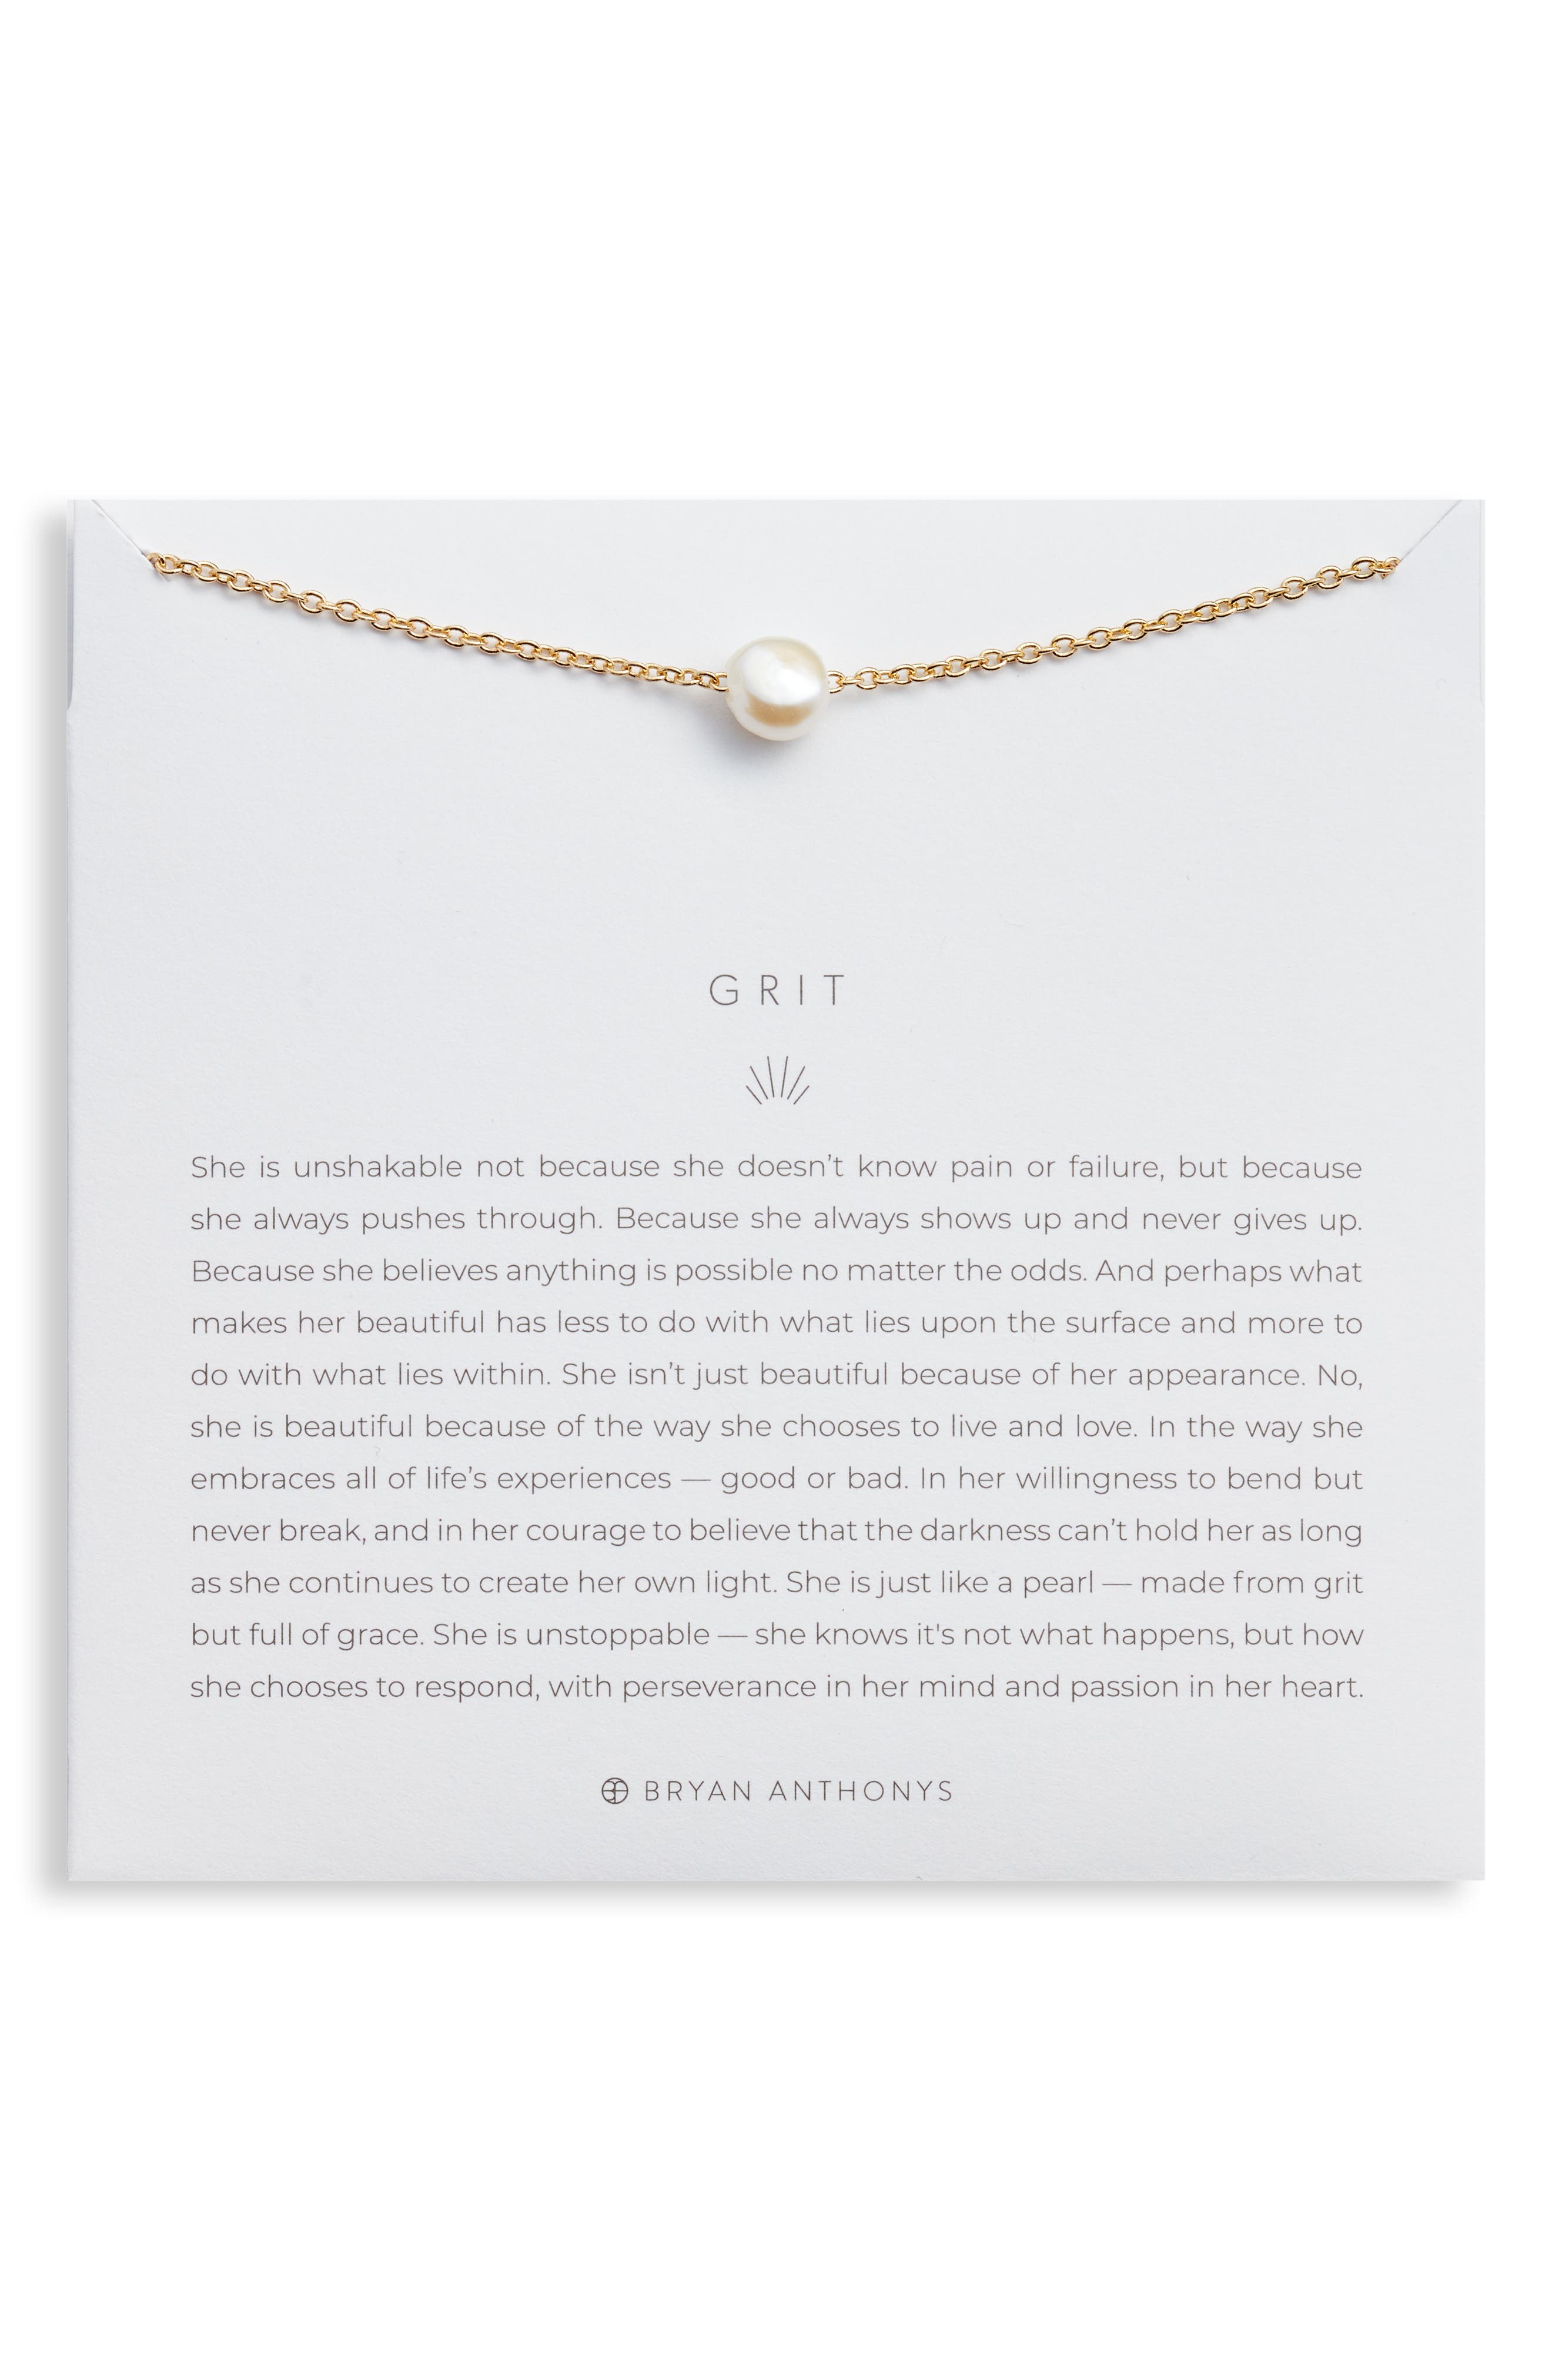 Bryan Anthonys Grit Pearl Pendant Necklace in Gold at Nordstrom